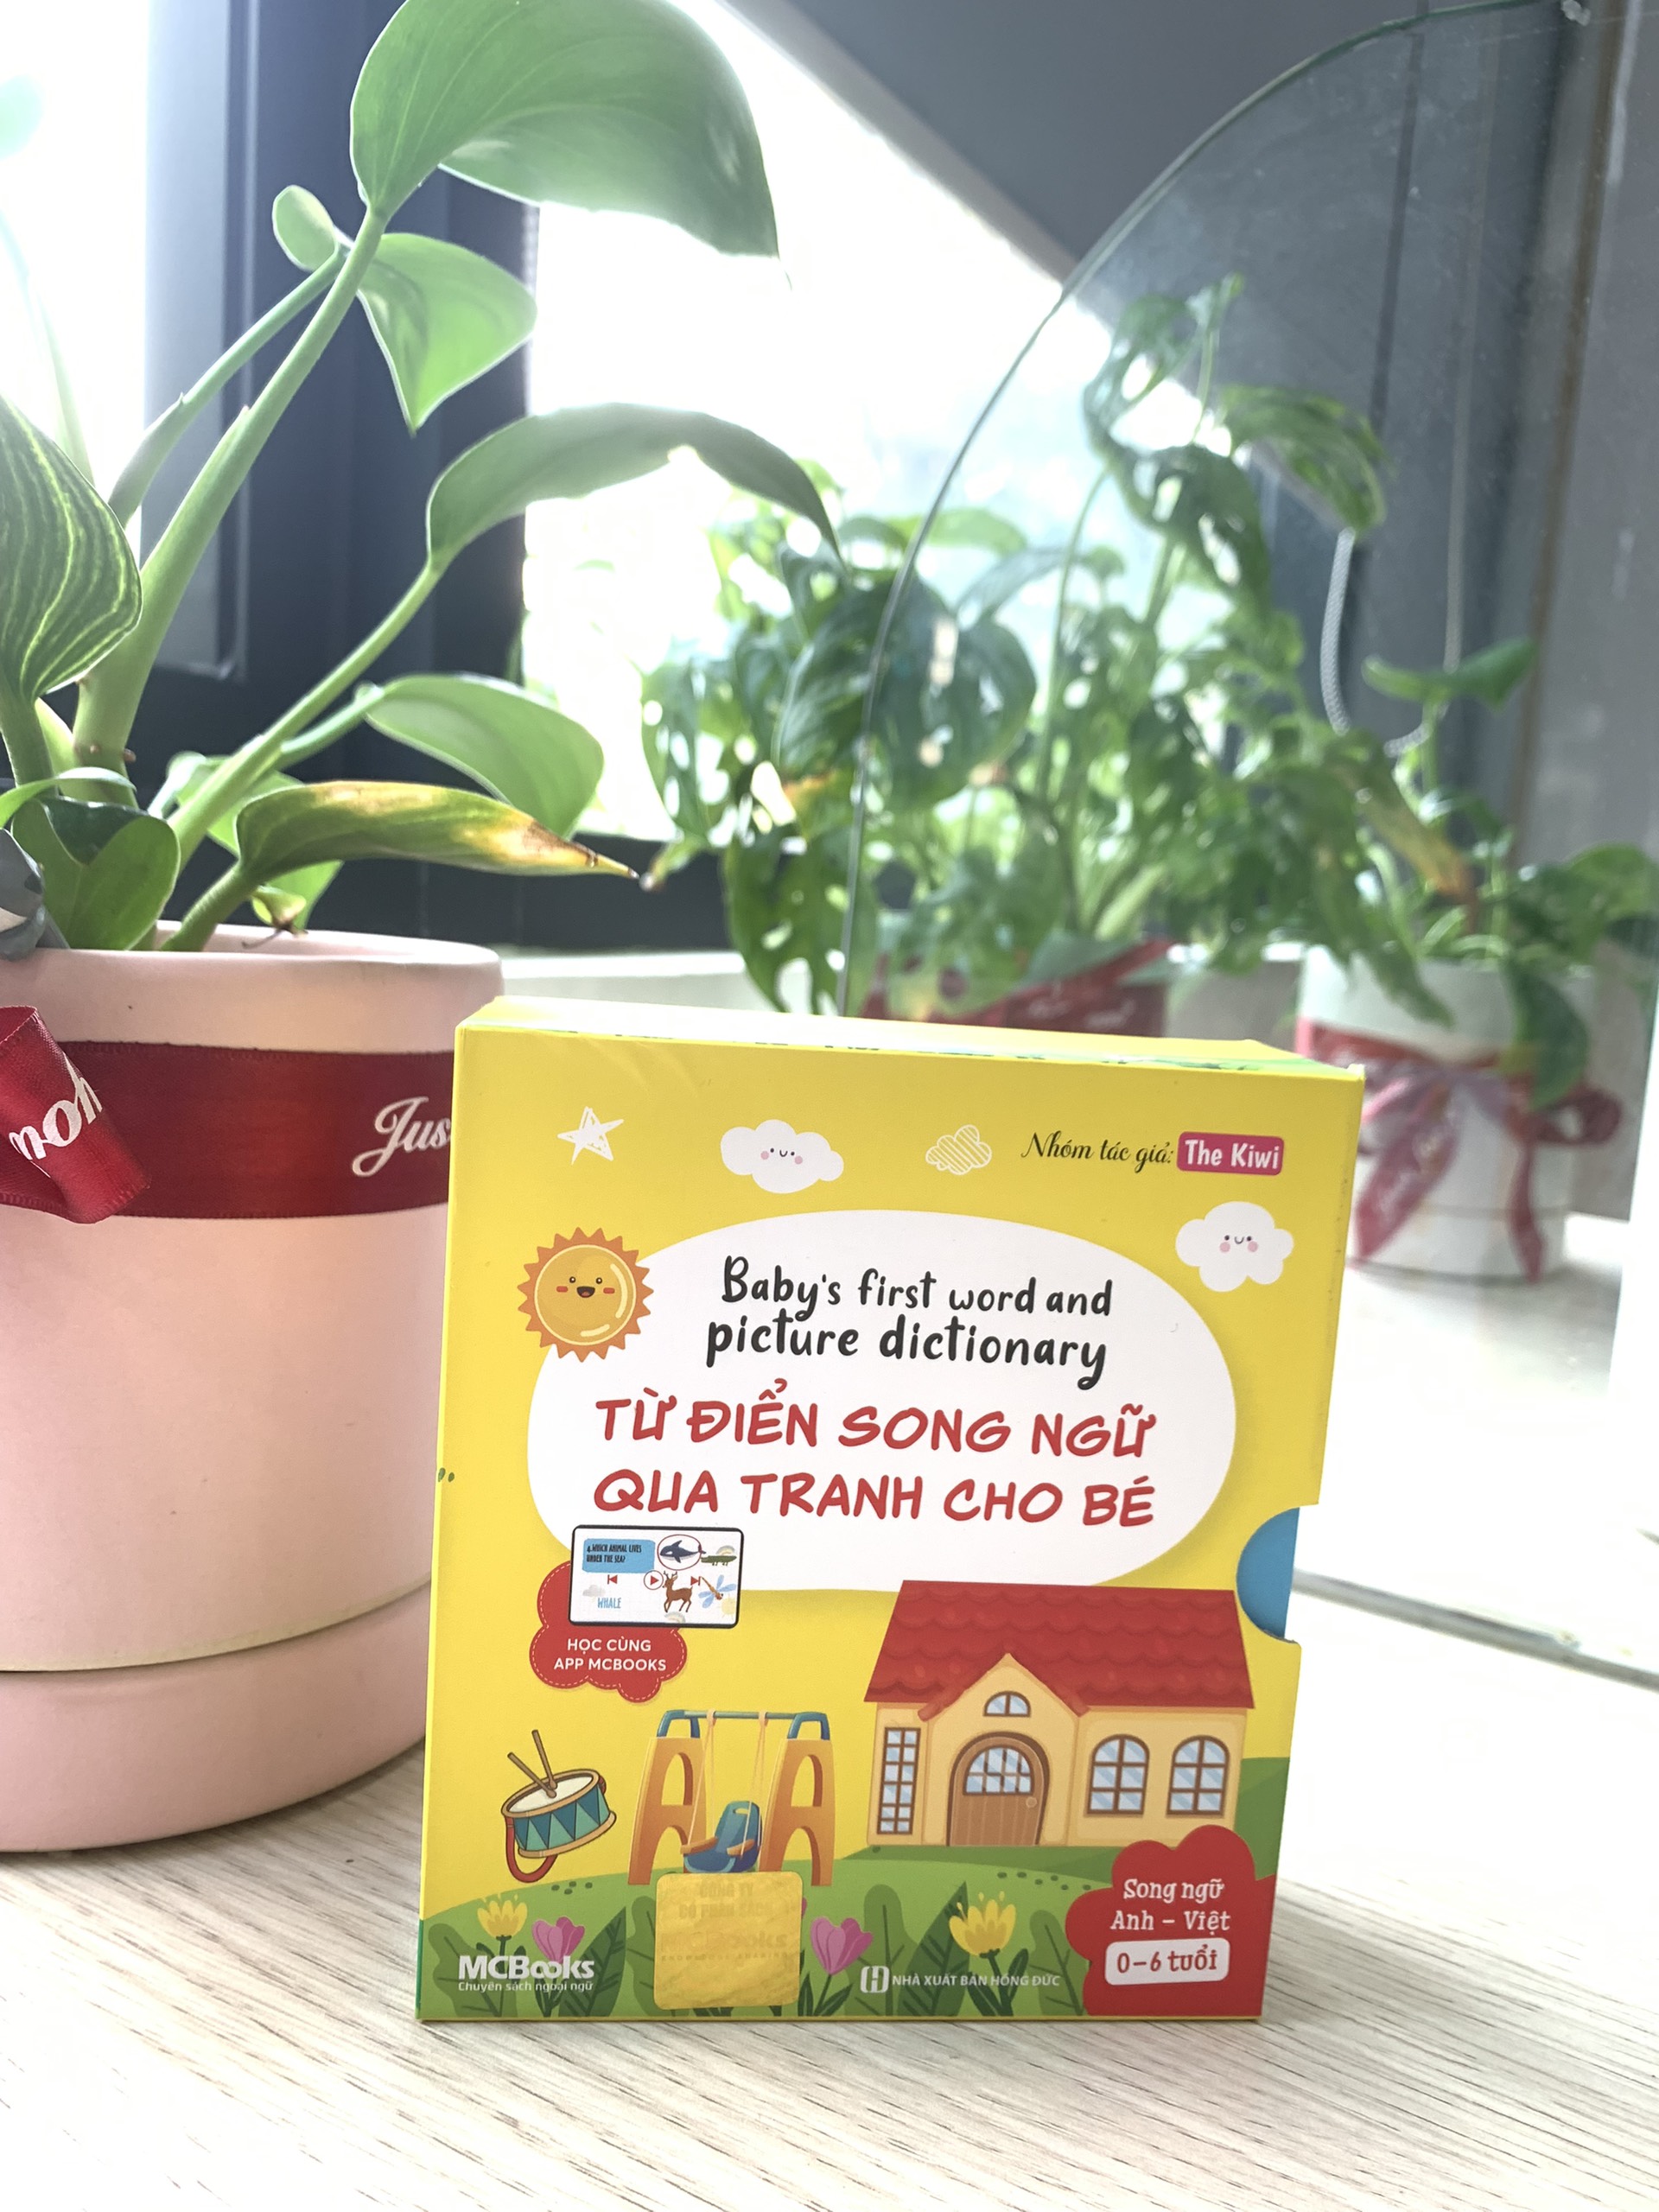 Từ điển song ngữ qua tranh cho bé - Baby's first words and picture dictionary - 6 cuốn